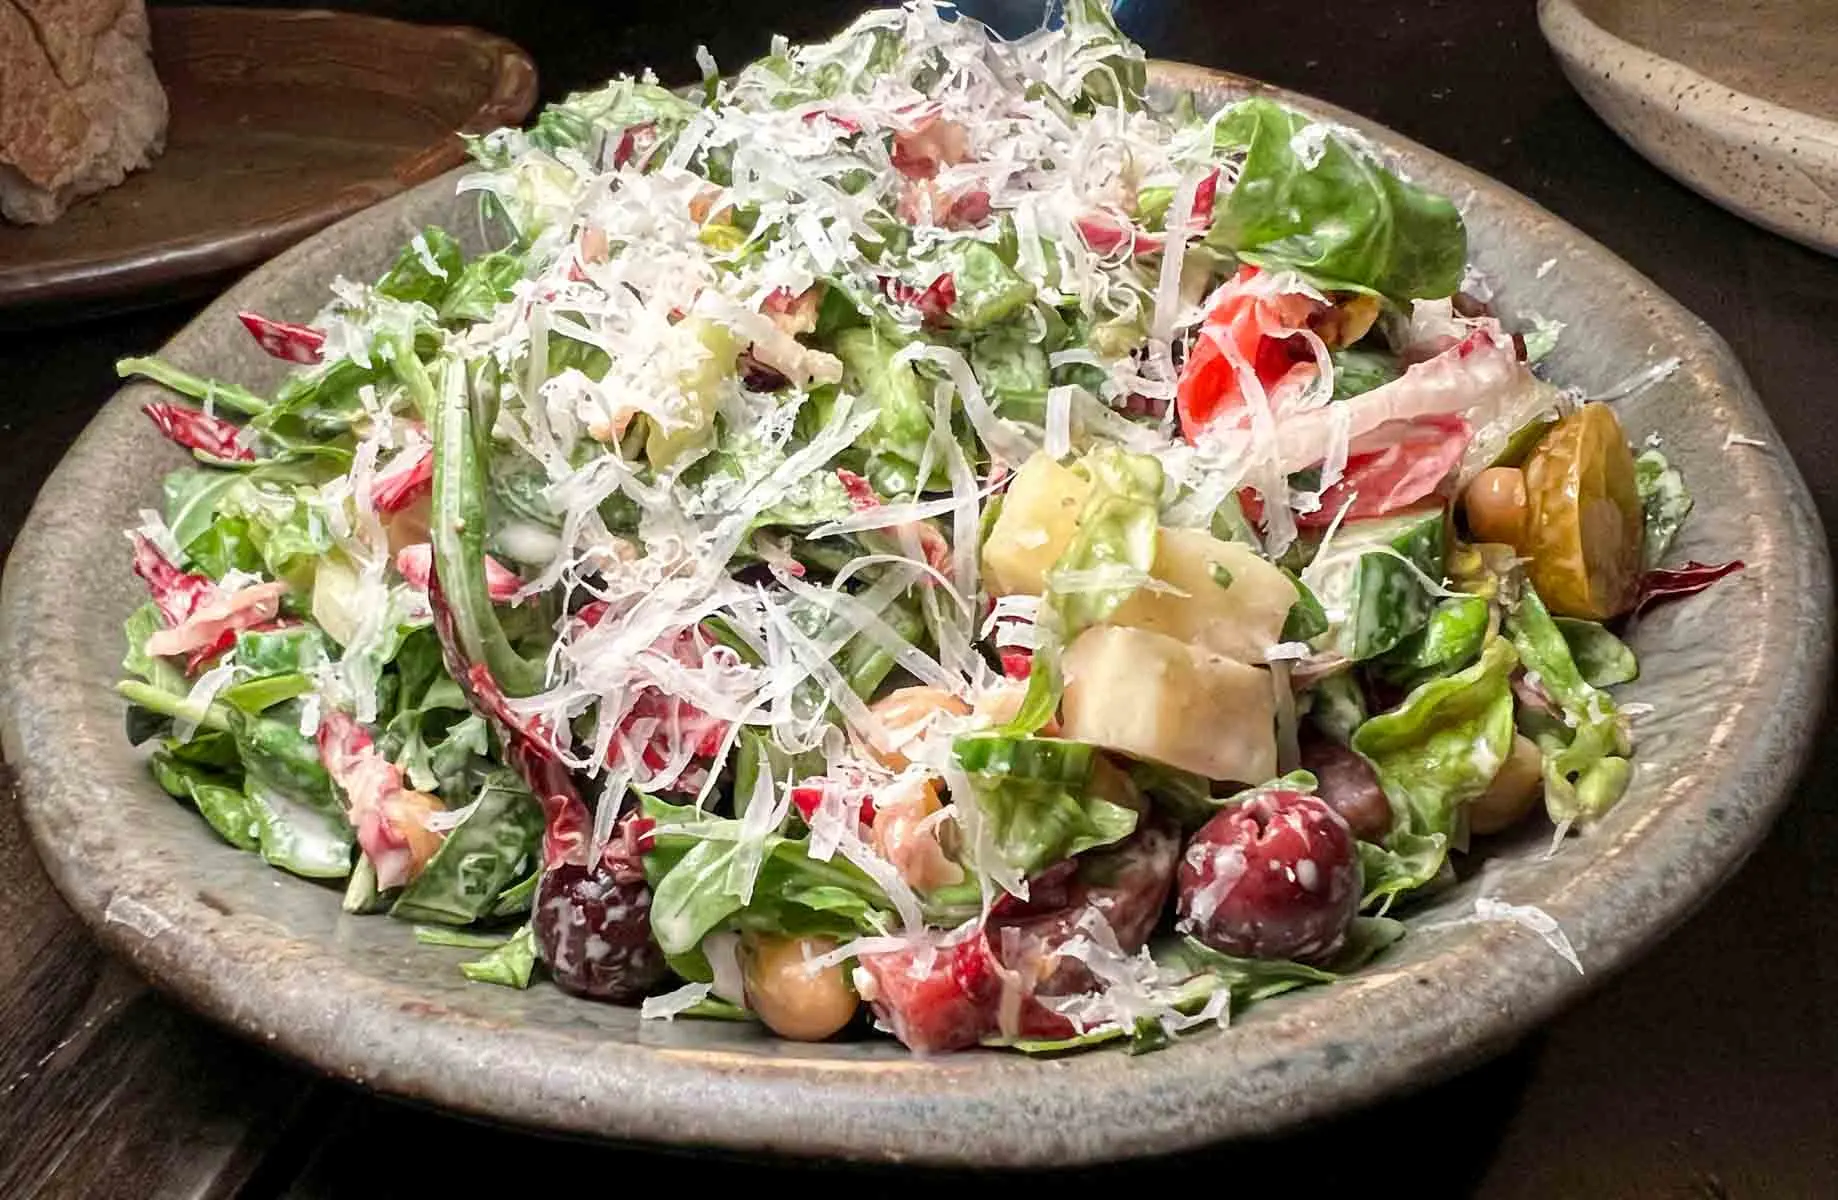 Italian Chopped Salad at Esthers Kitchen in Las Vegas